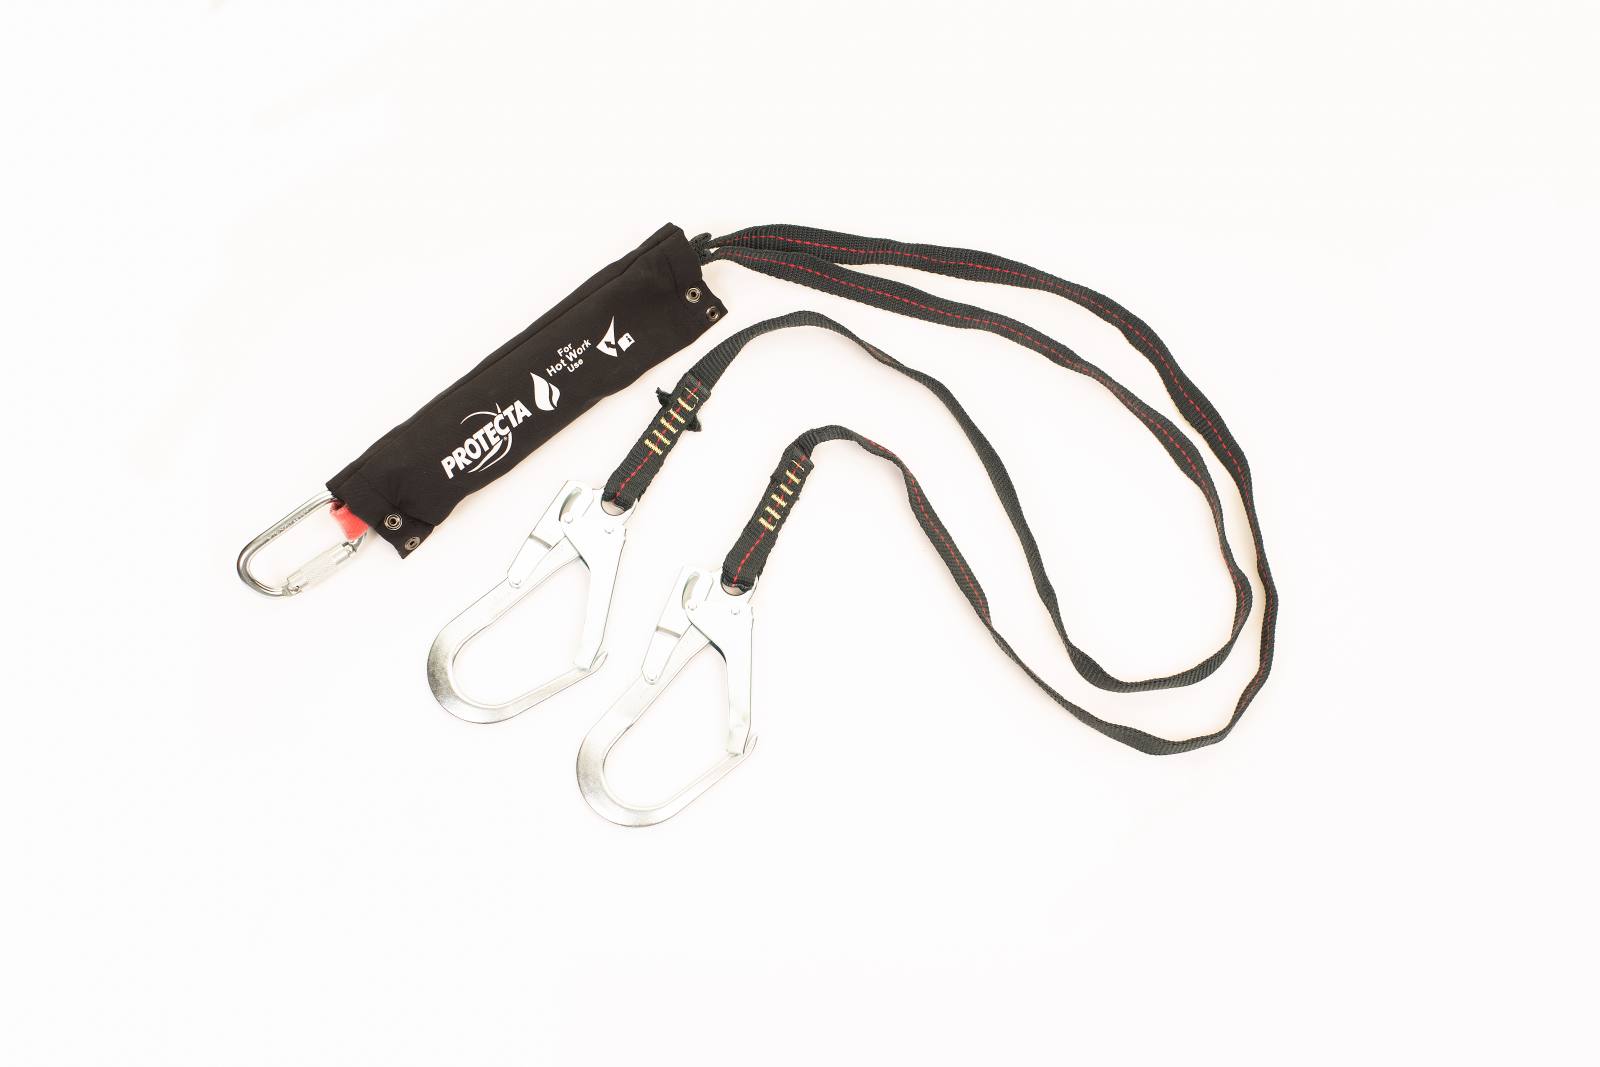 3M PROTECTA Pro heat-resistant Y-connector with strap shock absorber, length: 1.5 m, heat-resistant up to 371 Â°C, AJ514 twist-lock steel carabiner opening width 17 mm and 2 AJ595 steel tube hooks opening width 50 mm, 1.5 m